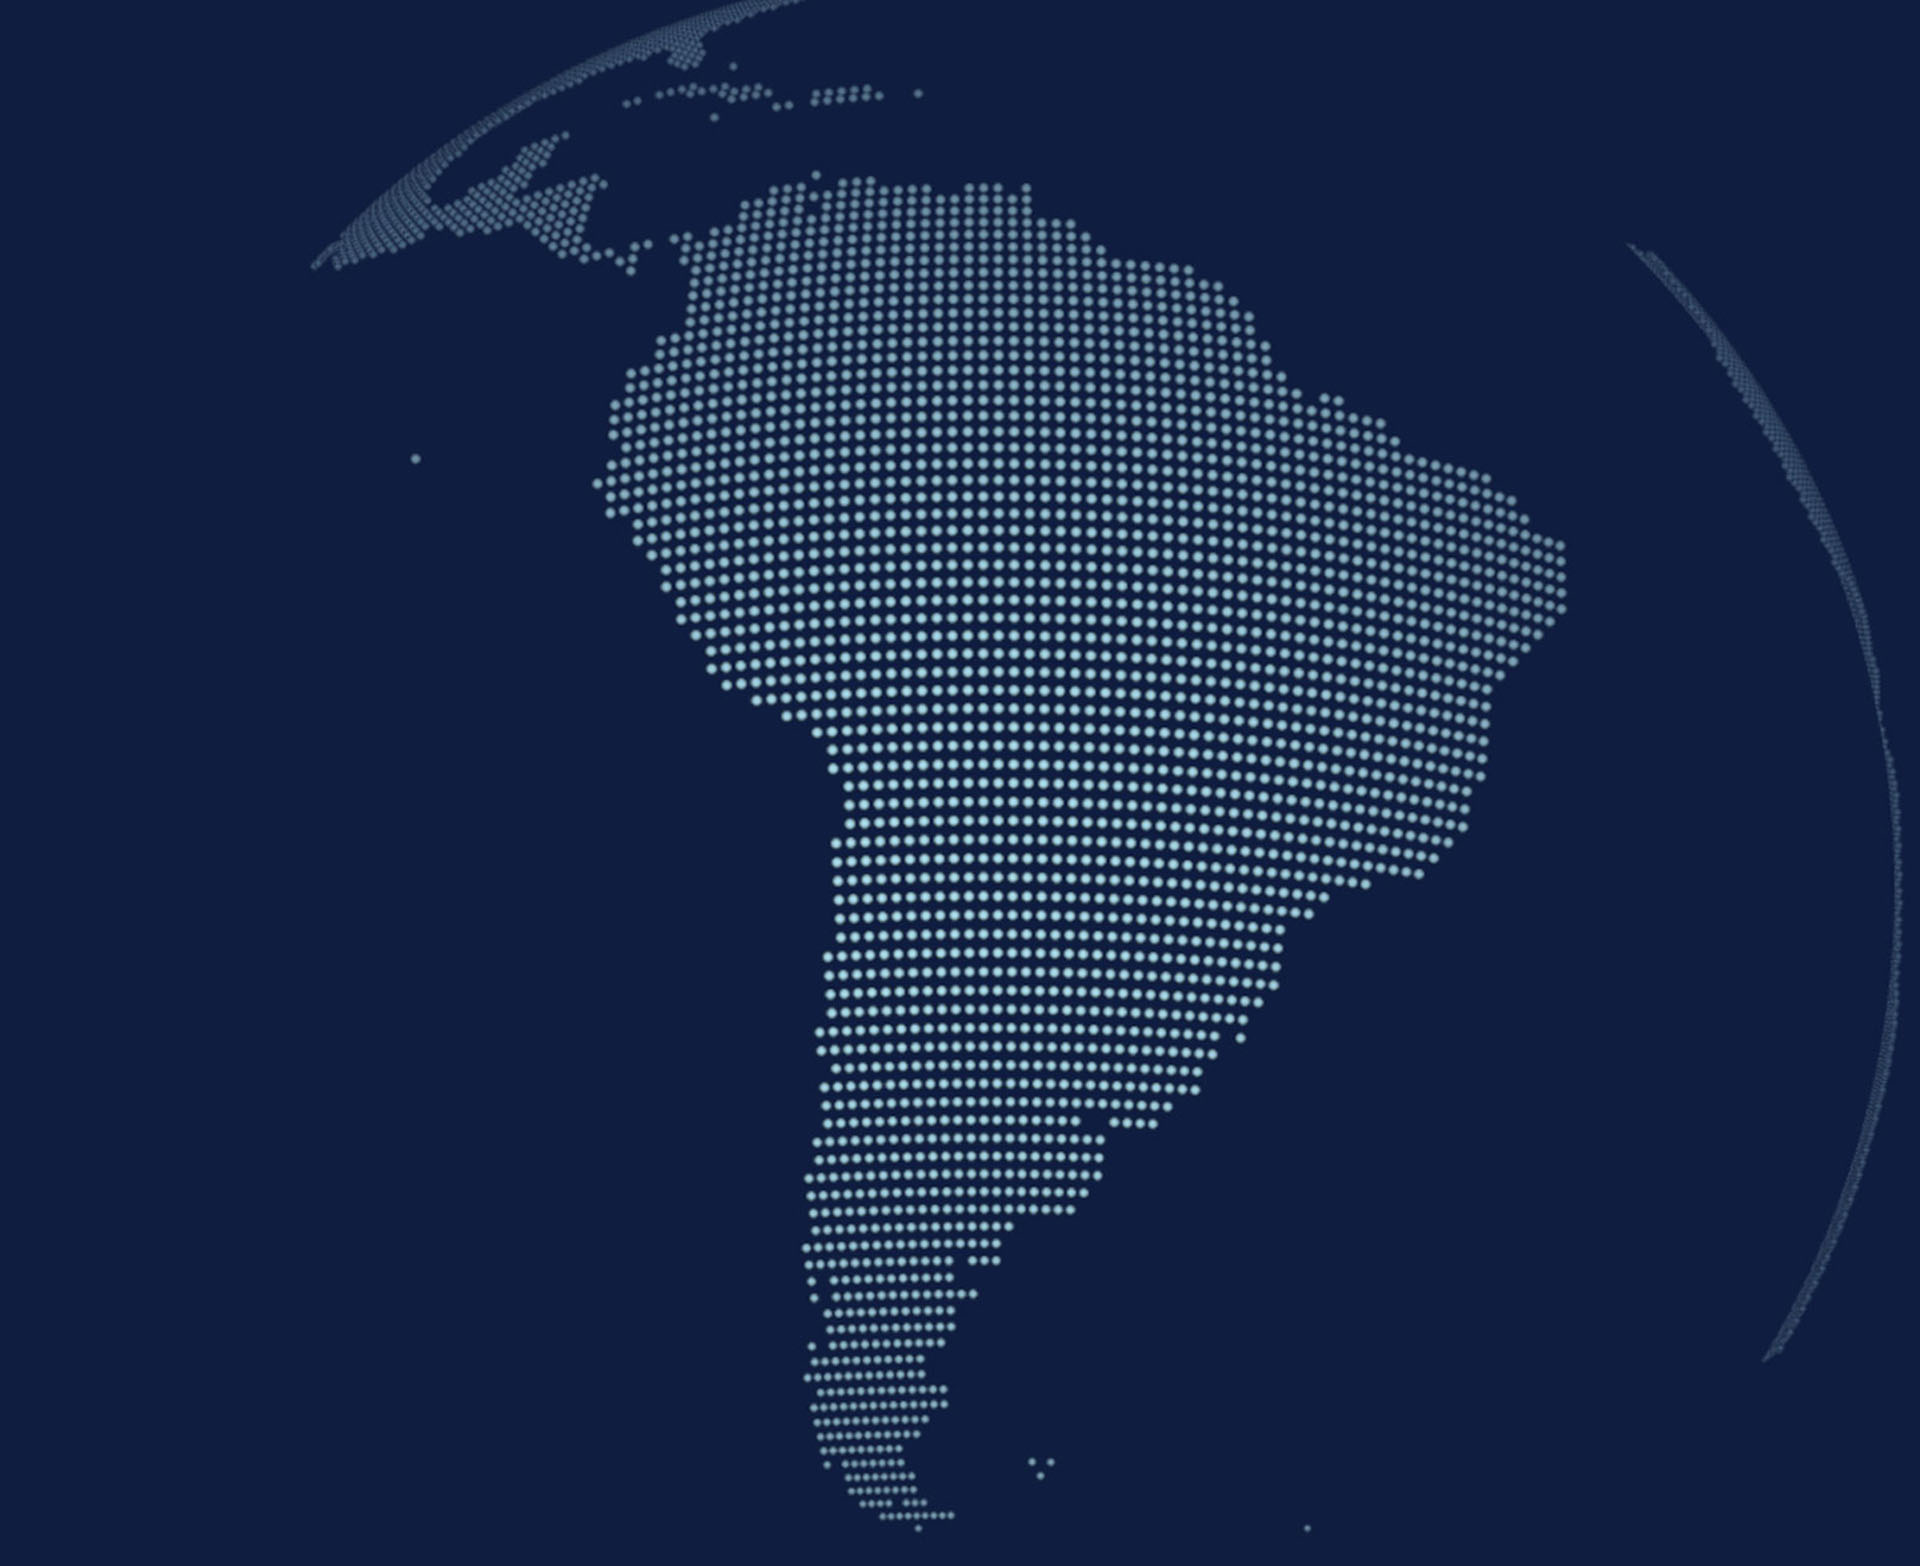 Latin America and the Caribbean | OECD